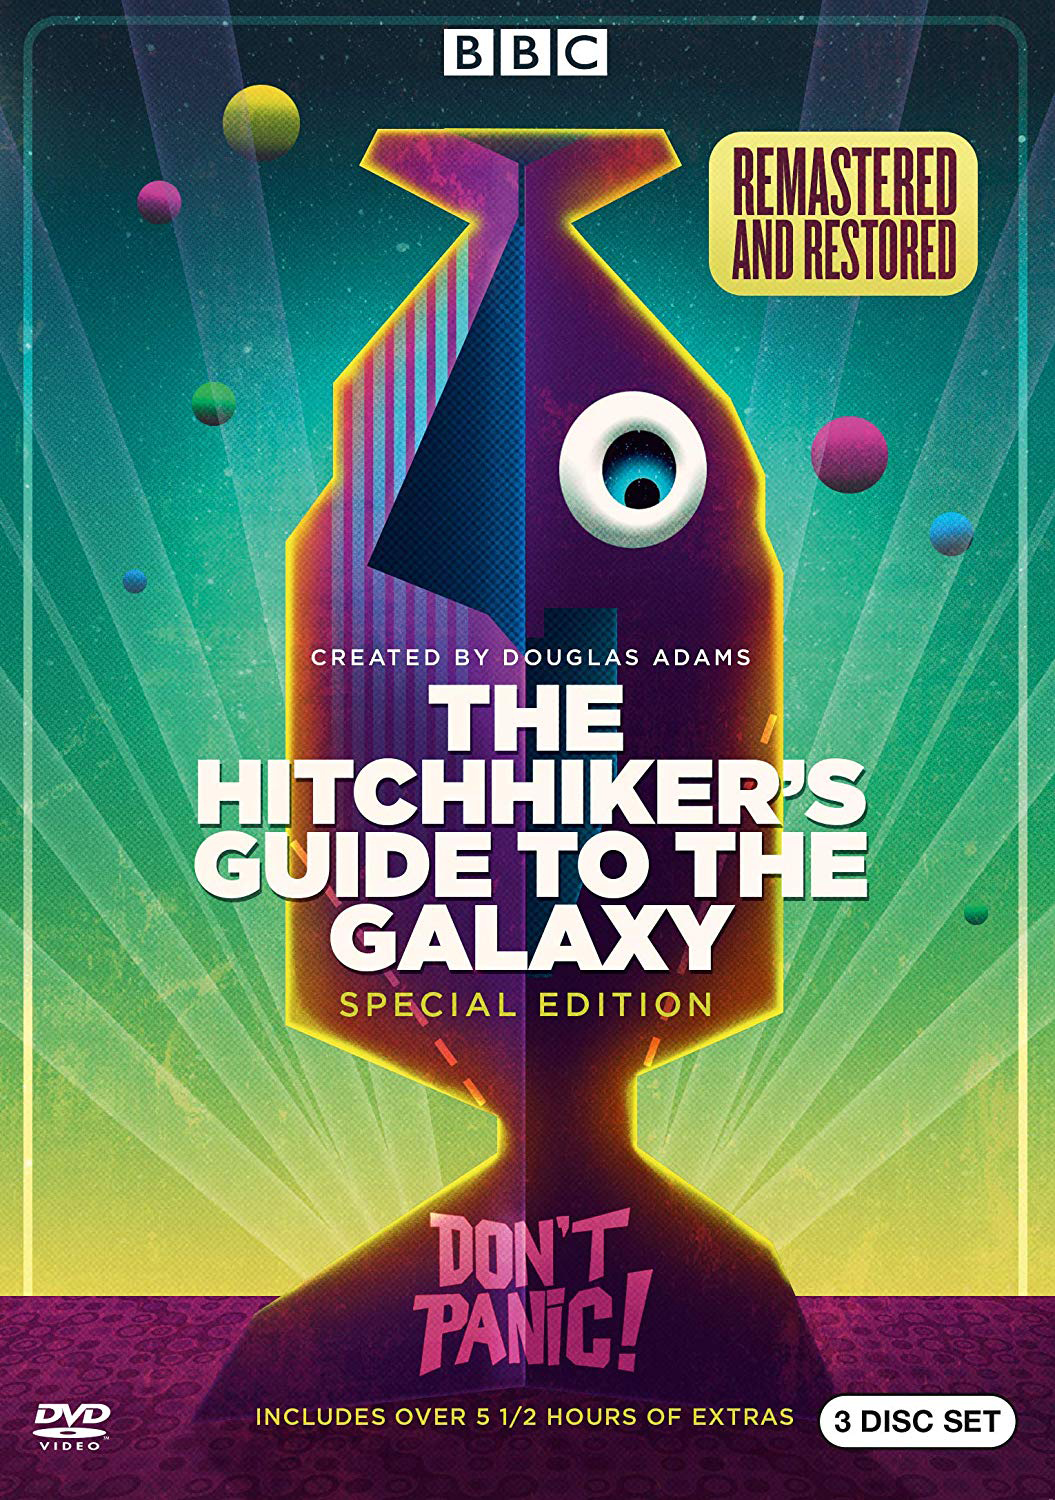 The Hitchhiker's Guide to the Galaxy [DVD] [1981] - Best Buy